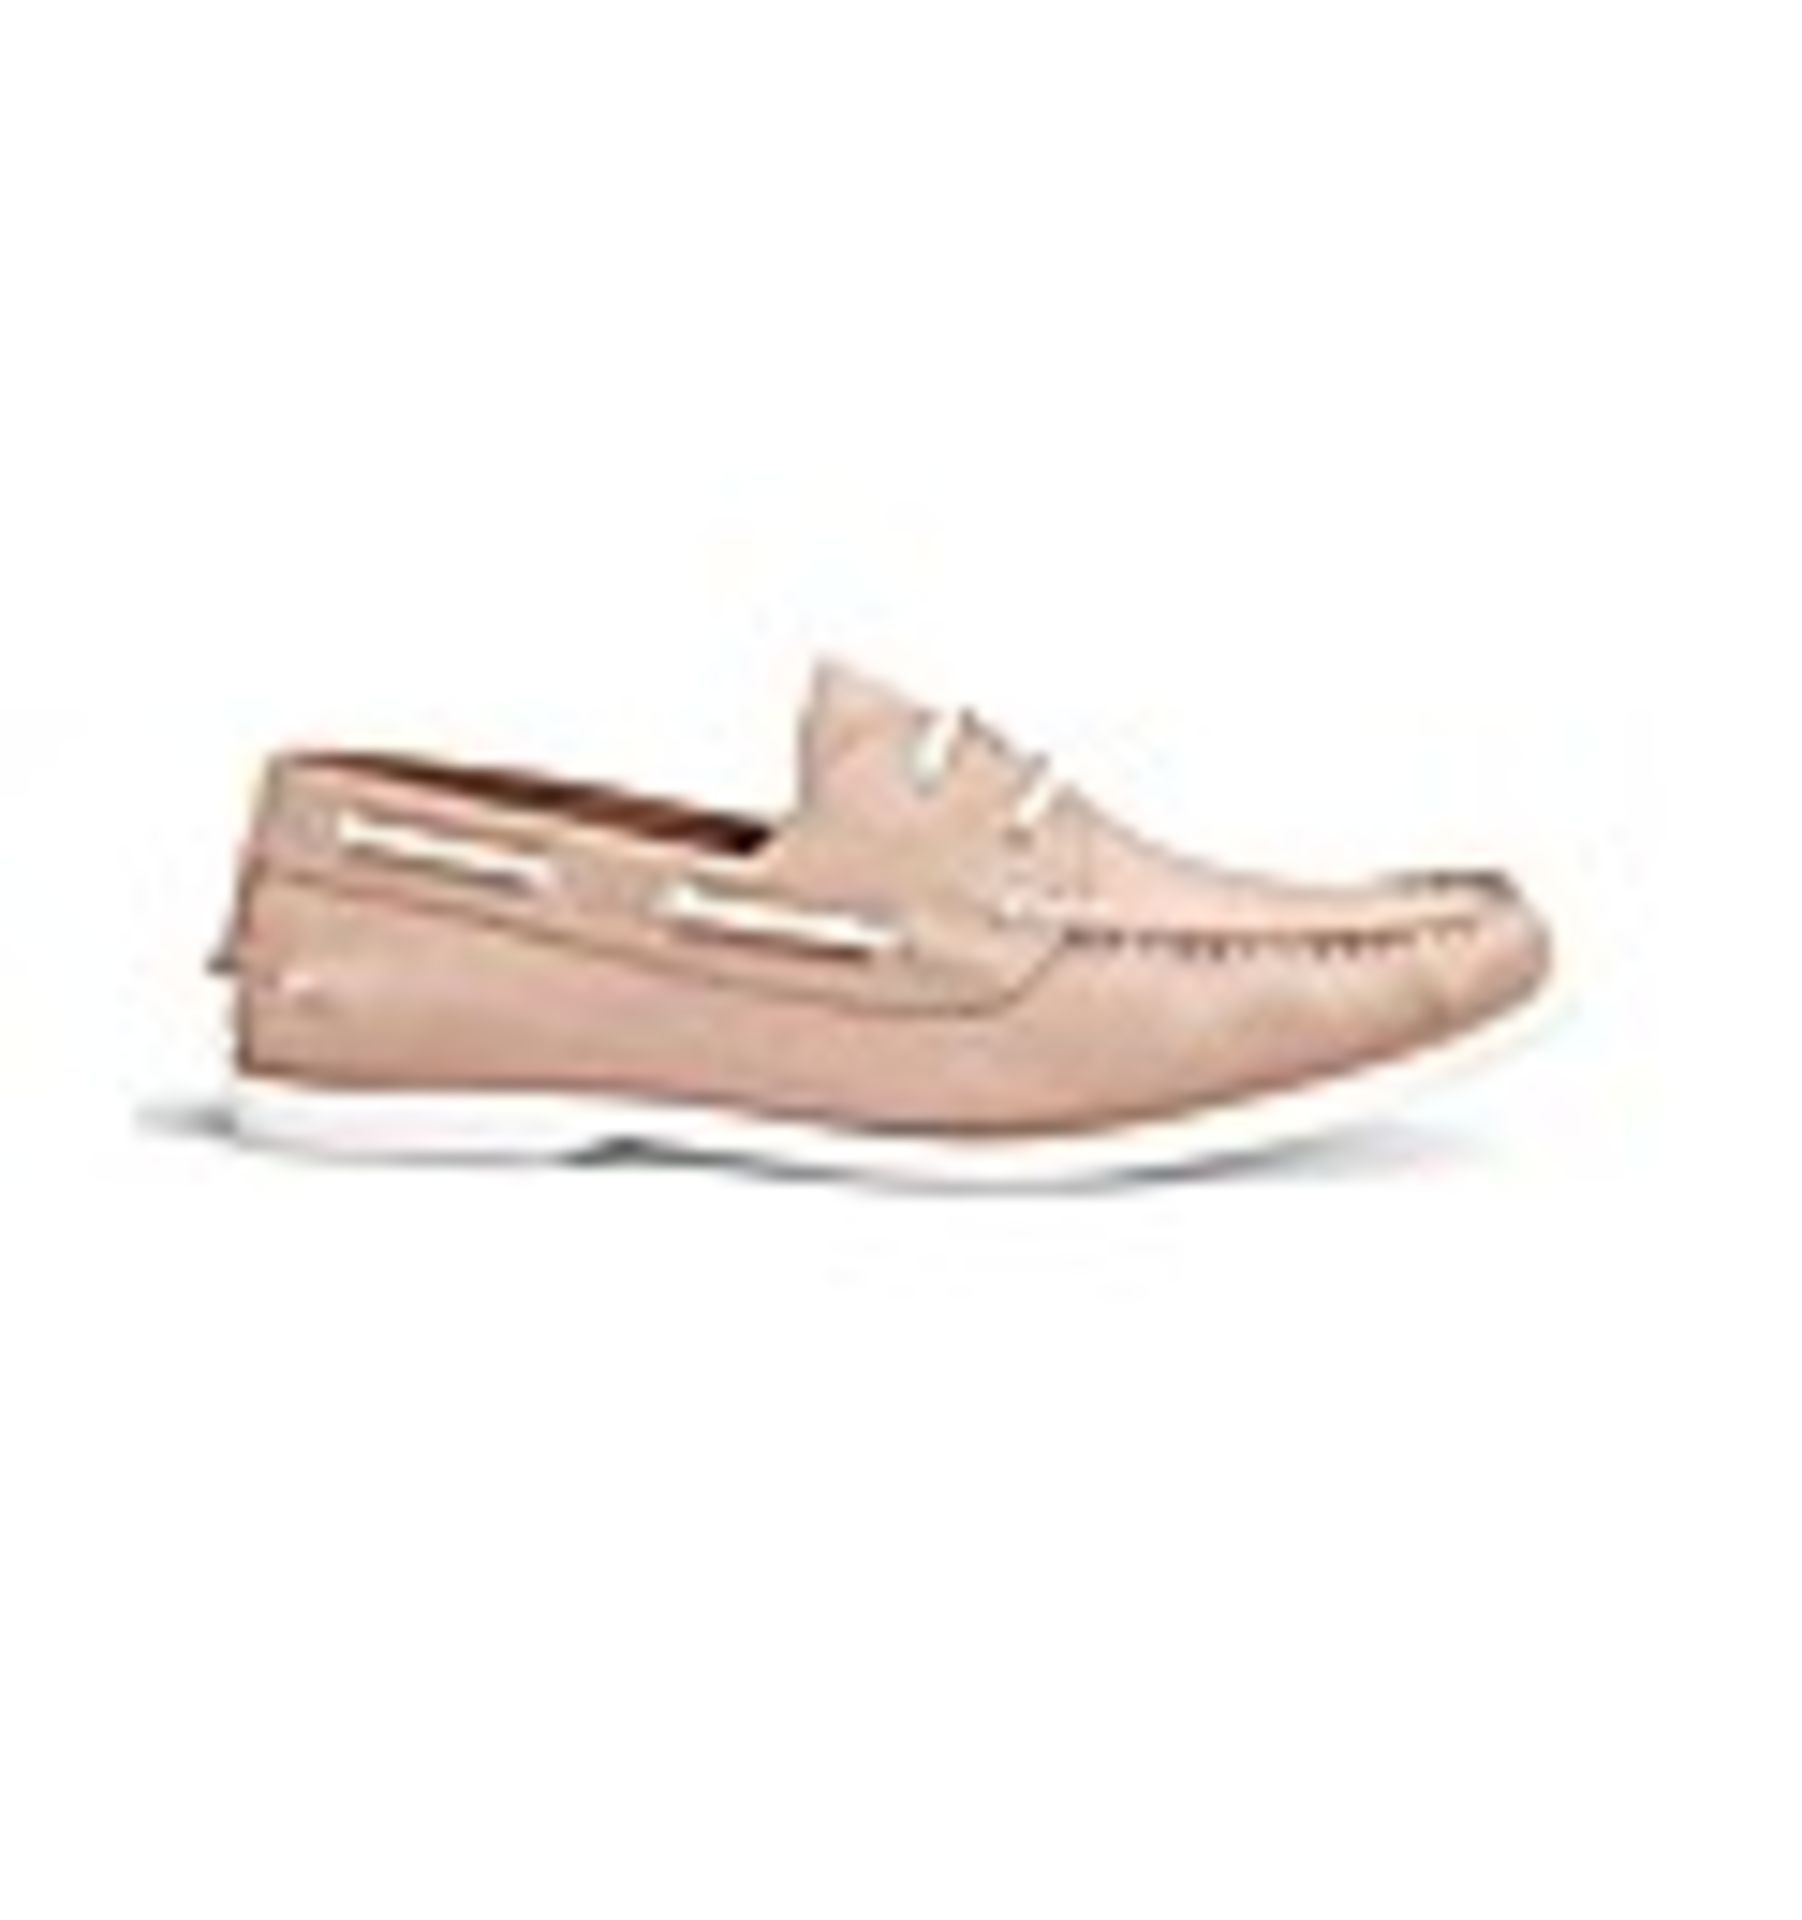 + VAT Brand New Pair Gents Pink Joe Brown Boat Shoes Size 11